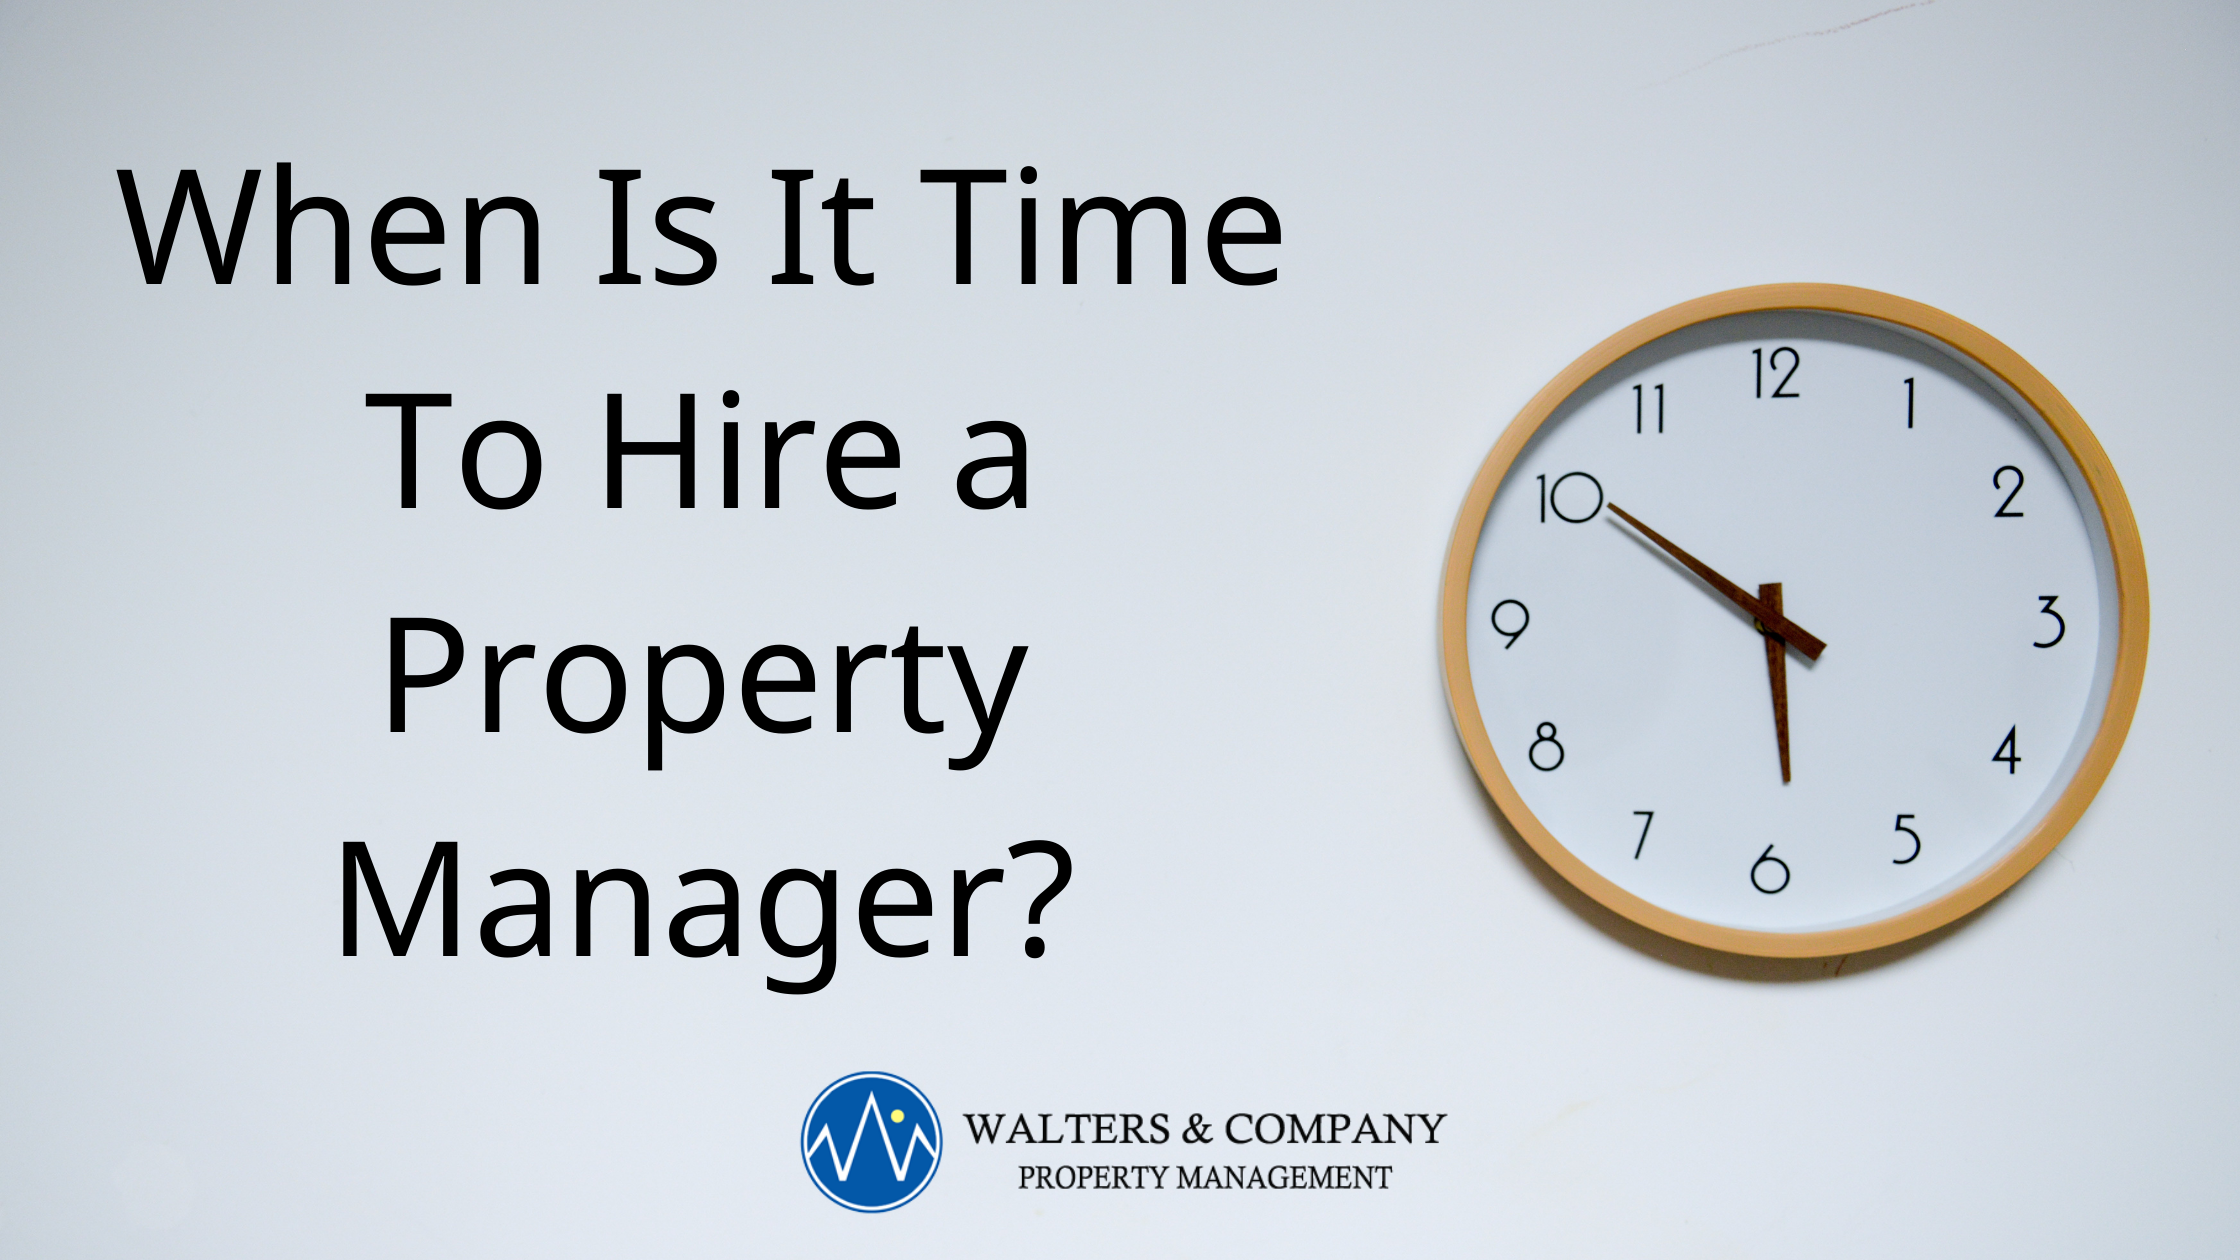 When Is It Time To Hire A Property Manager?